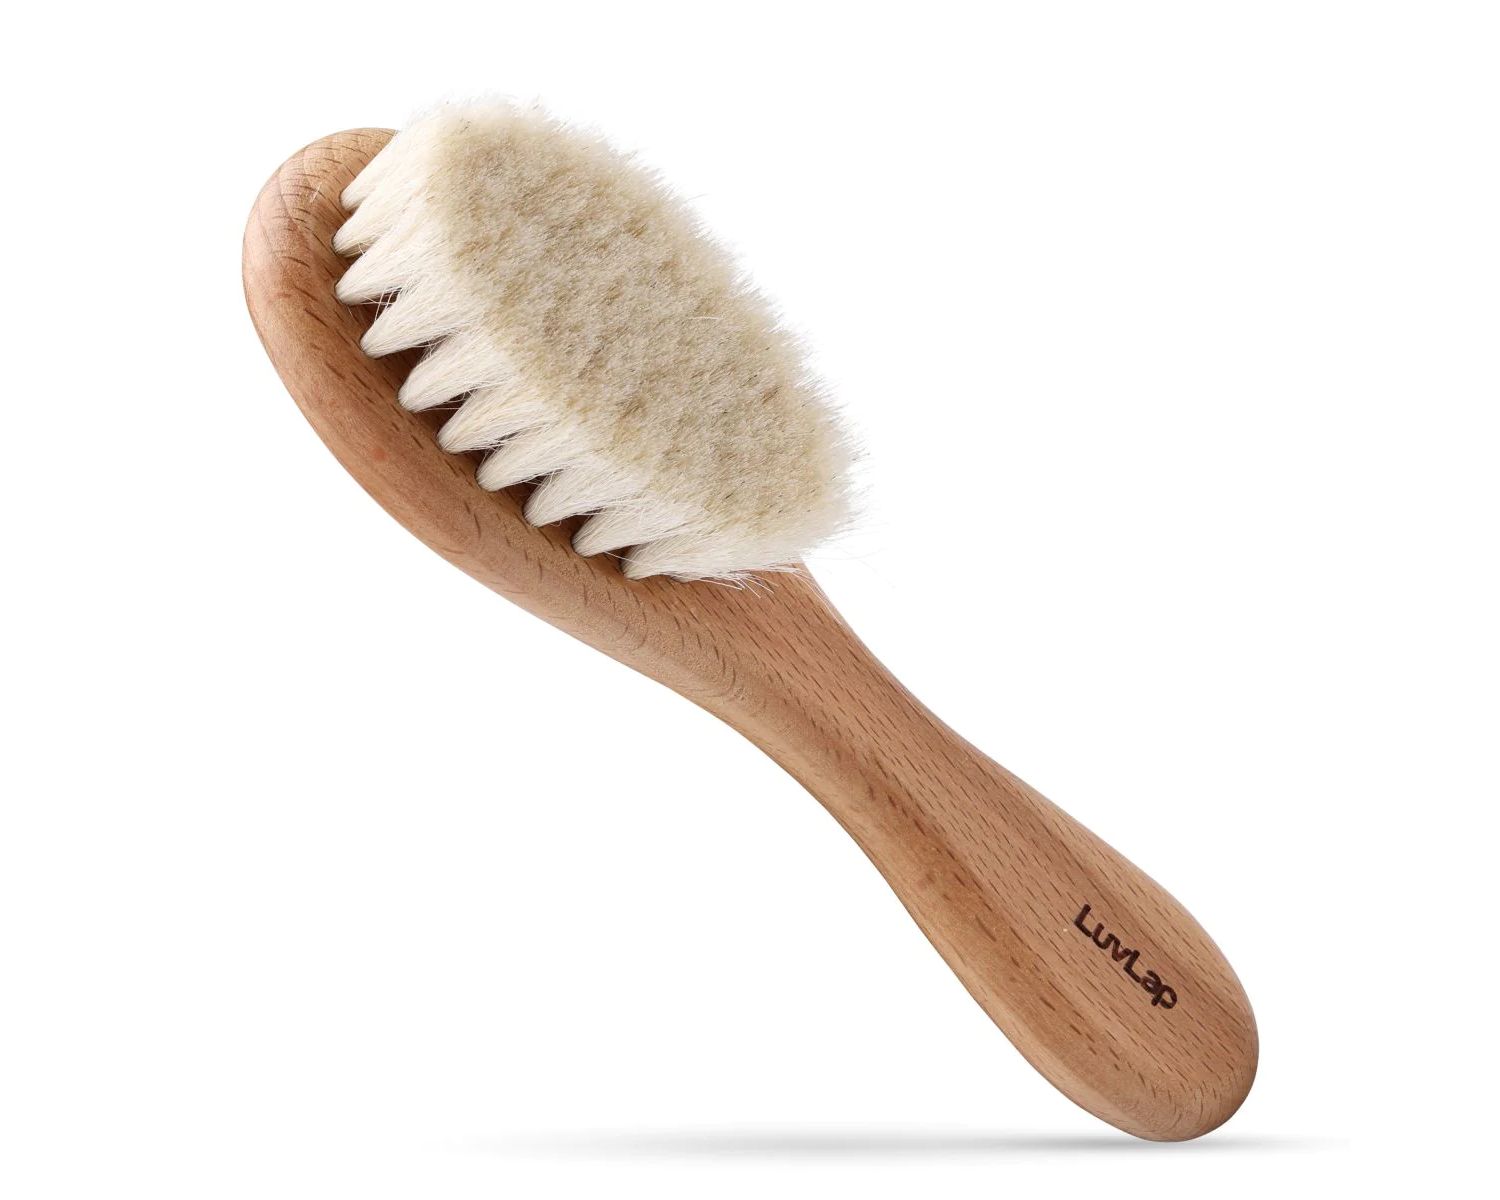 Baby Hairbrush Review: The Perfect Grooming Tool for Your Little One